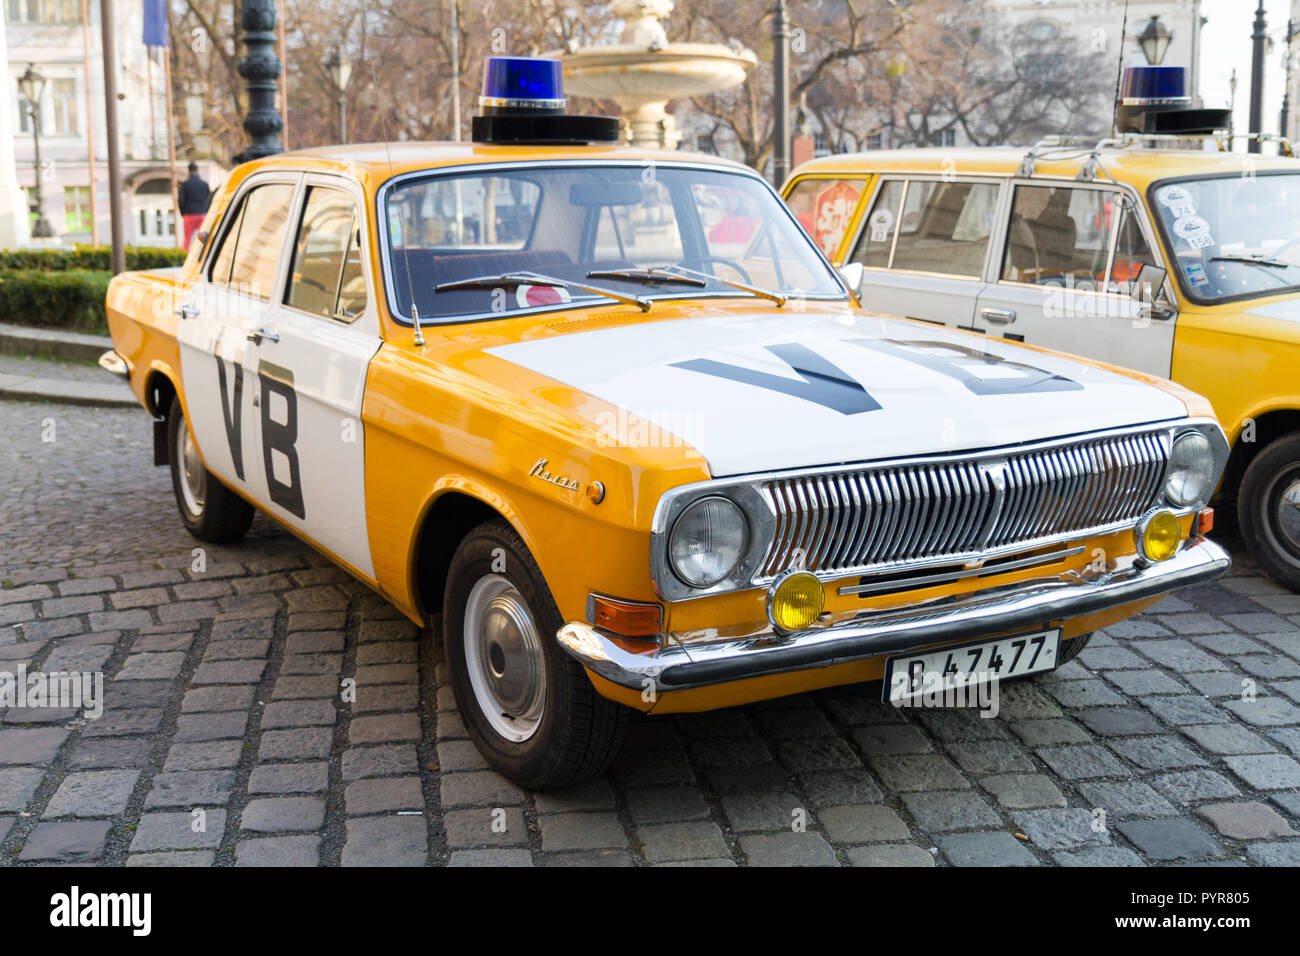 A re-enactment of the Candle manifestation of 1988/3/25 with the notorious 'VB' (Verejna bezpecnost) communist police cars and policemen. Stock Photo